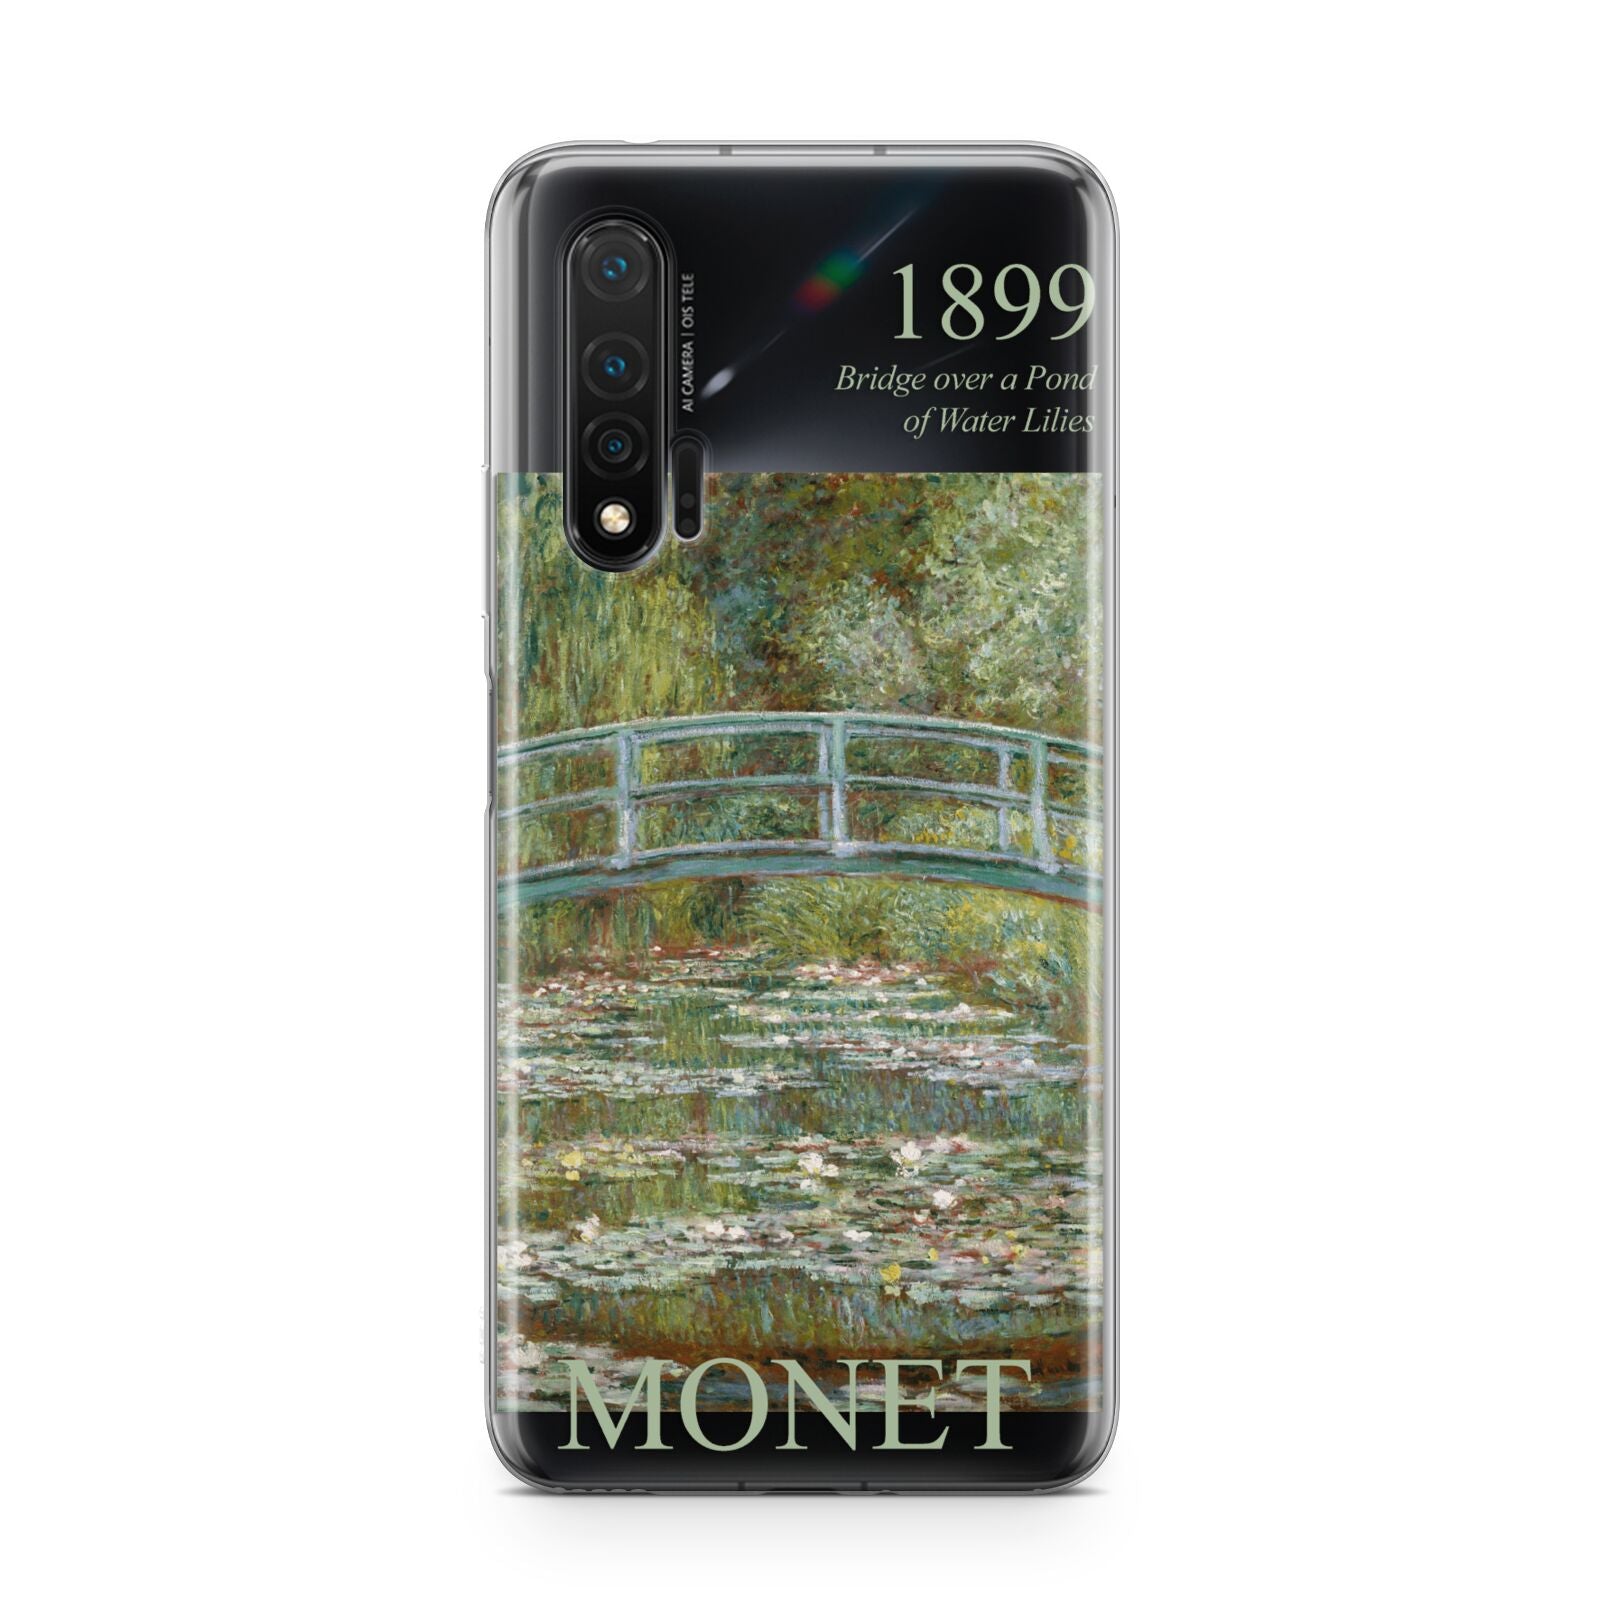 Bridge Over A Pond Of Water Lilies By Monet Huawei Nova 6 Phone Case